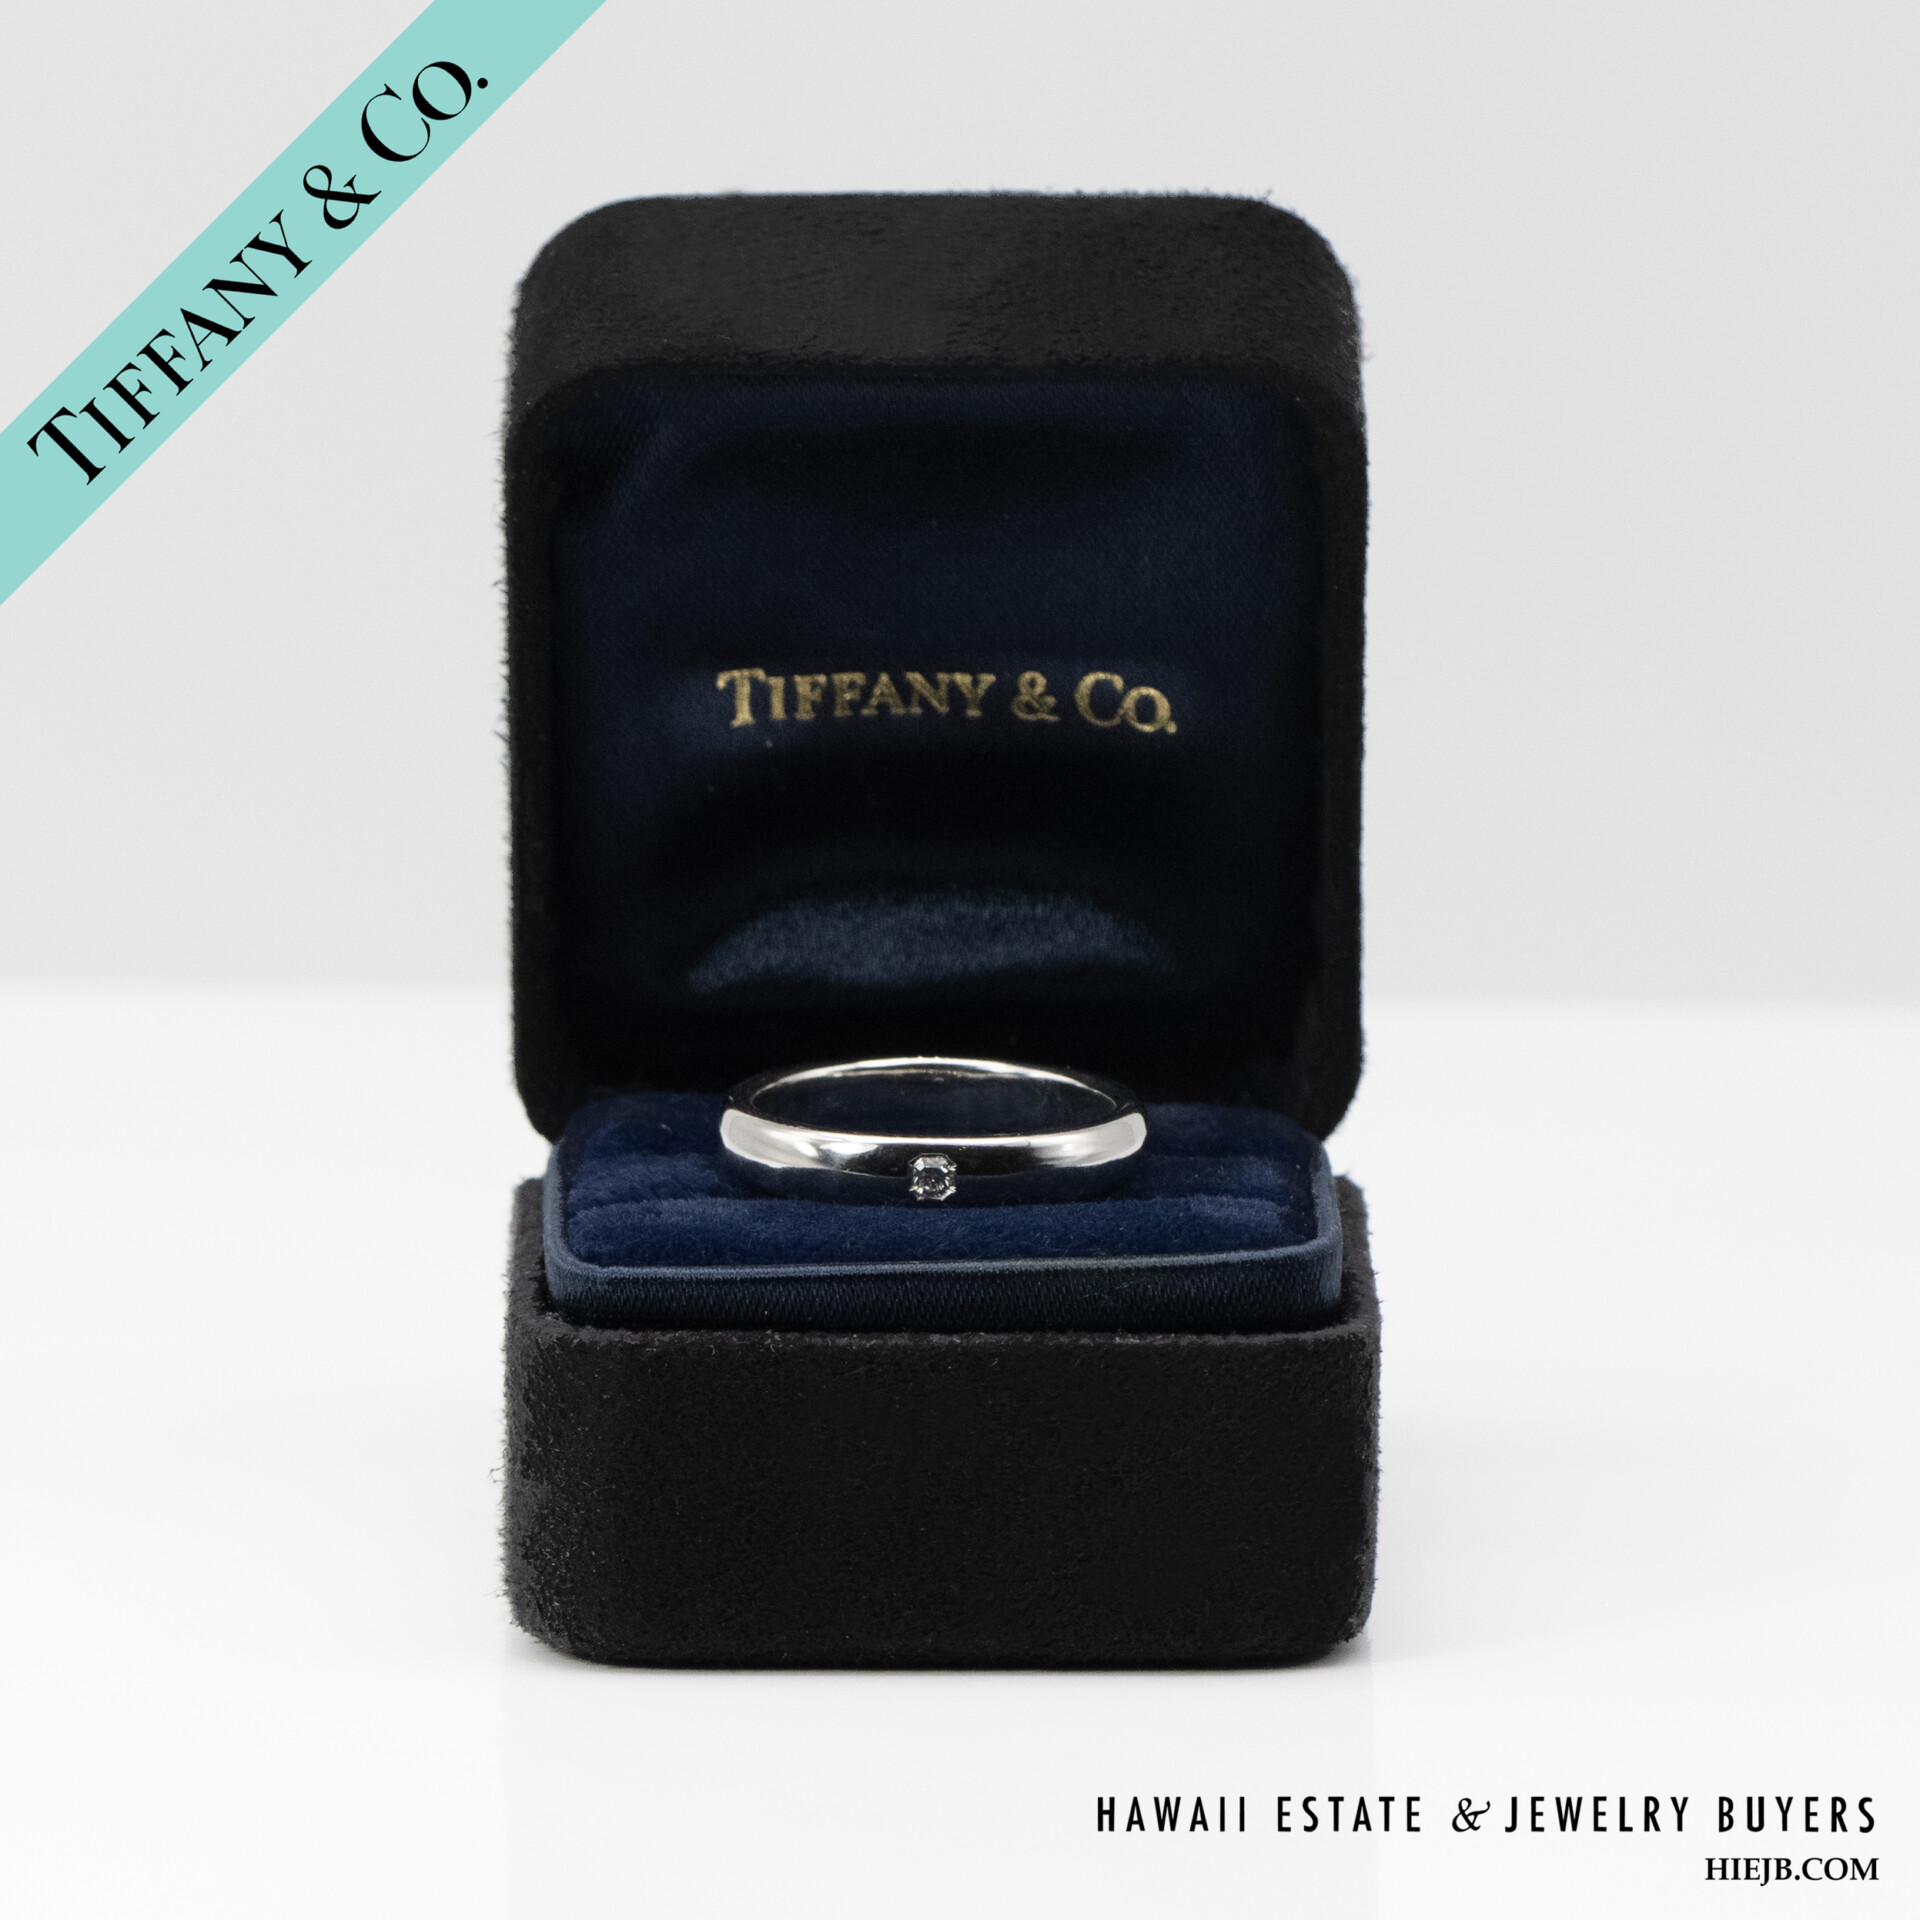 TIFFANY & CO. AUTHENTIC .53CT ROUND BRILLIANT PLATINUM SOLITAIRE ENGAGEMENT  RING - Hawaii Estate & Jewelry Buyers